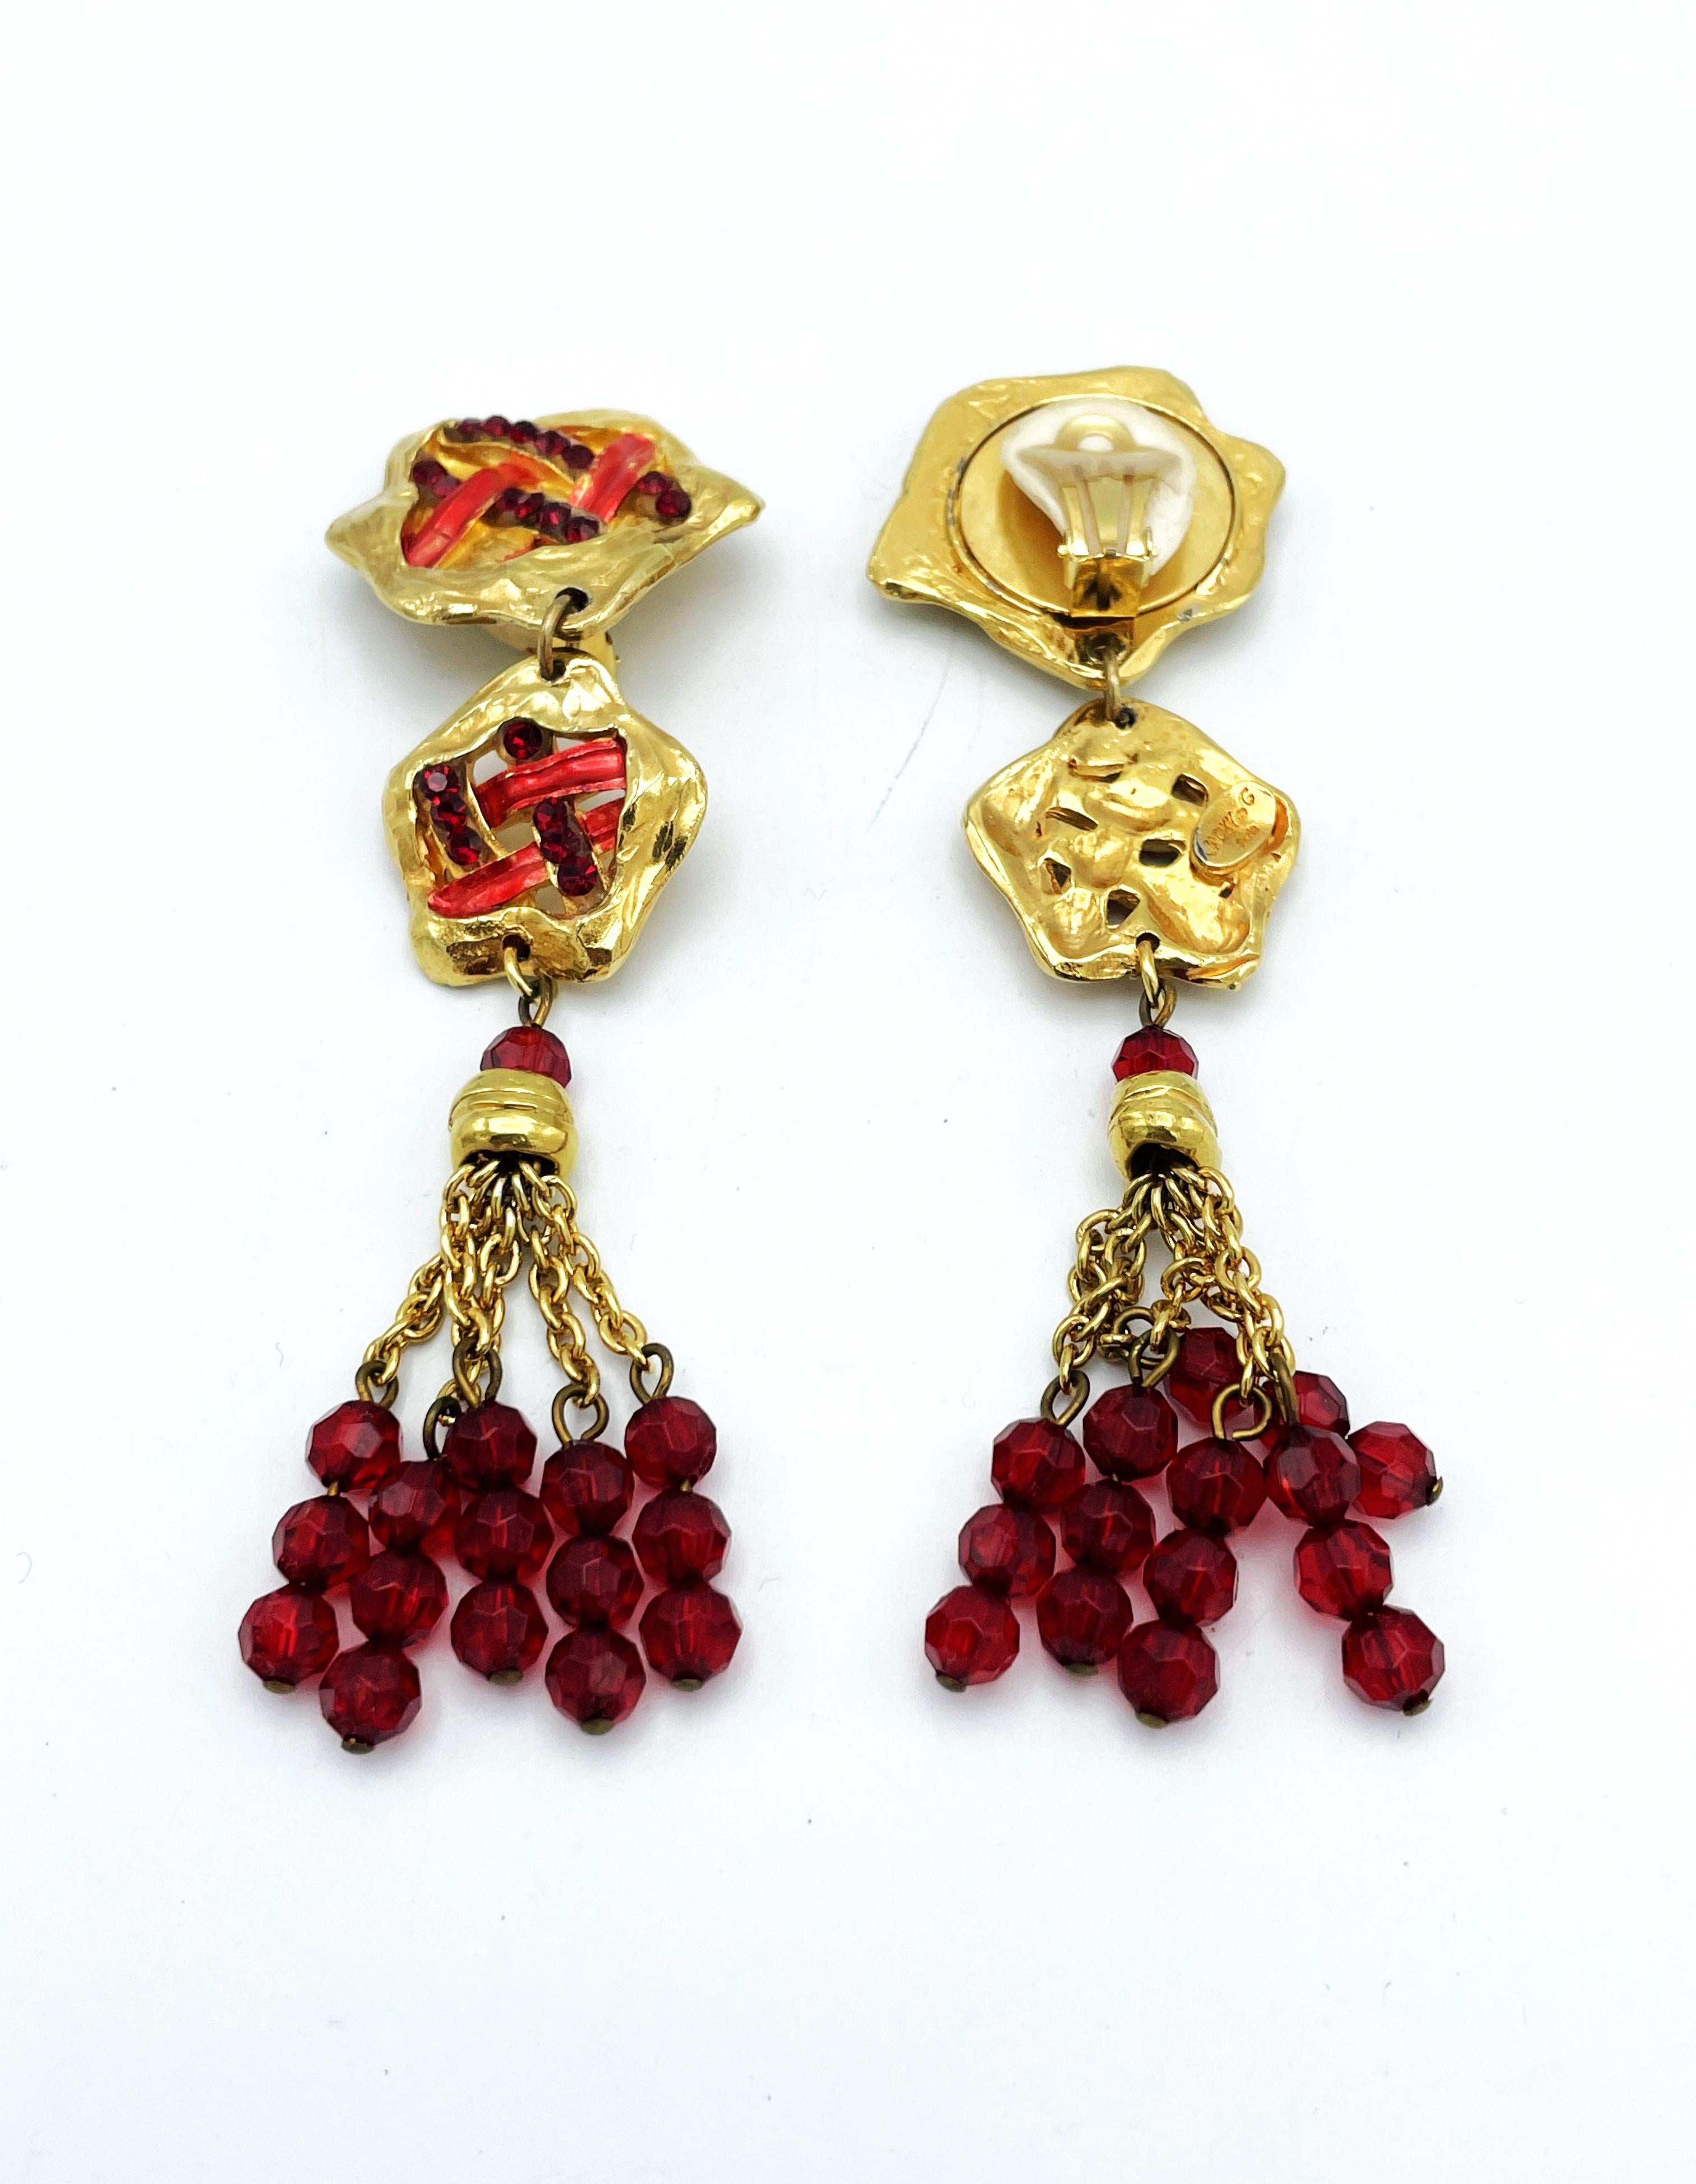 Long Clip-one earing by JACKY de G Paris, gold plated, red rhinestons For Sale 2